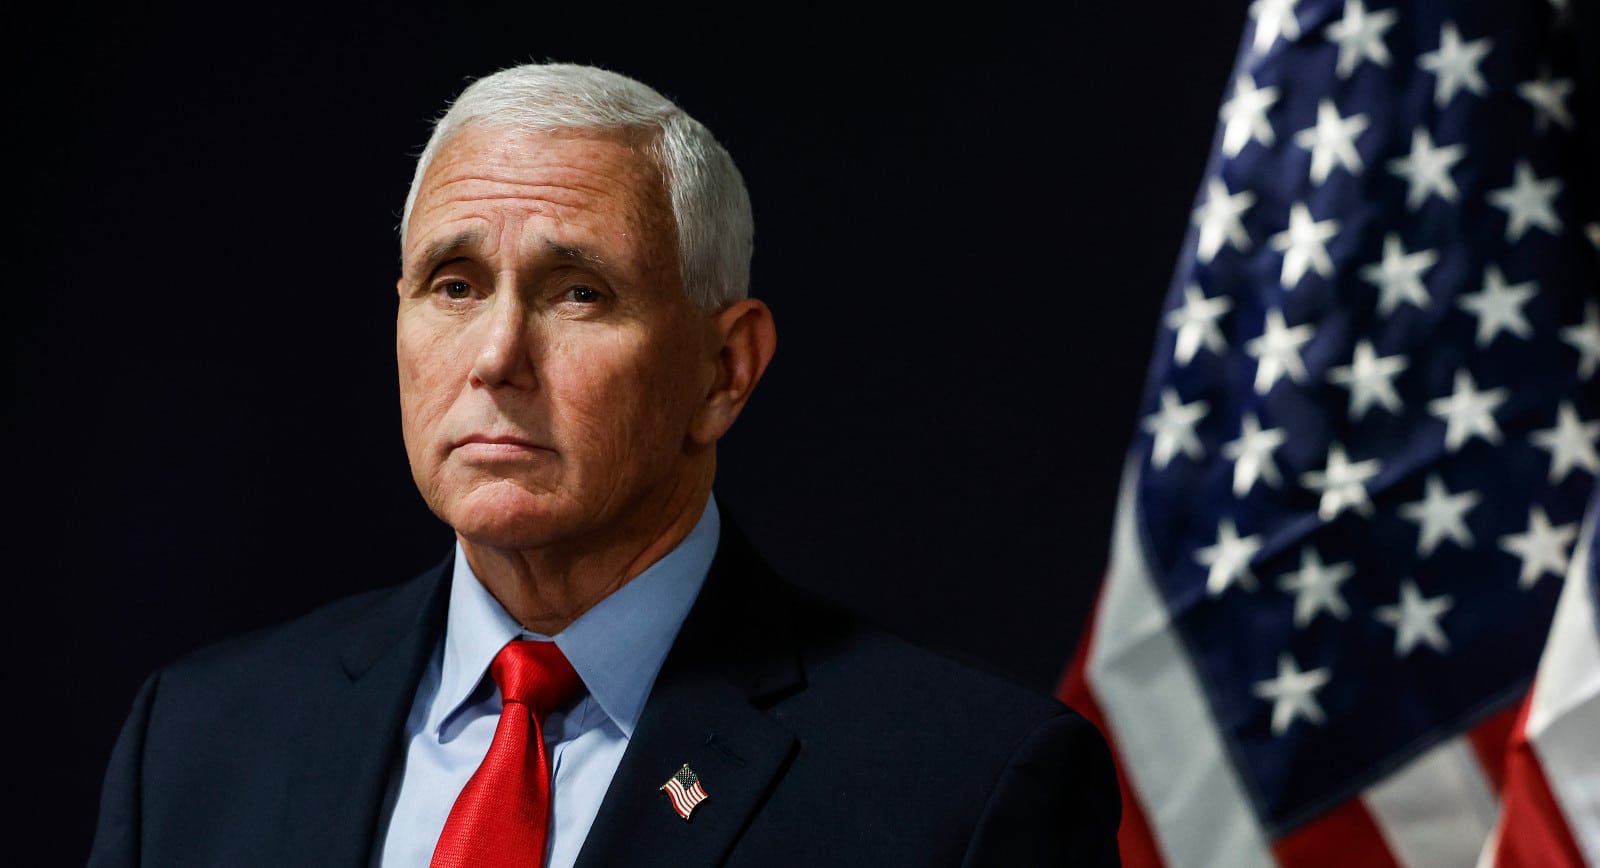 Former Vice President Mike Pence In Hot Water For Controversial Comments, Says 'This Is What Happens When We Have Leading Voices like Donald Trump, Vivek Ramaswamy, and Ron DeSantis signaling retreat from America’s role as leader of the free world'